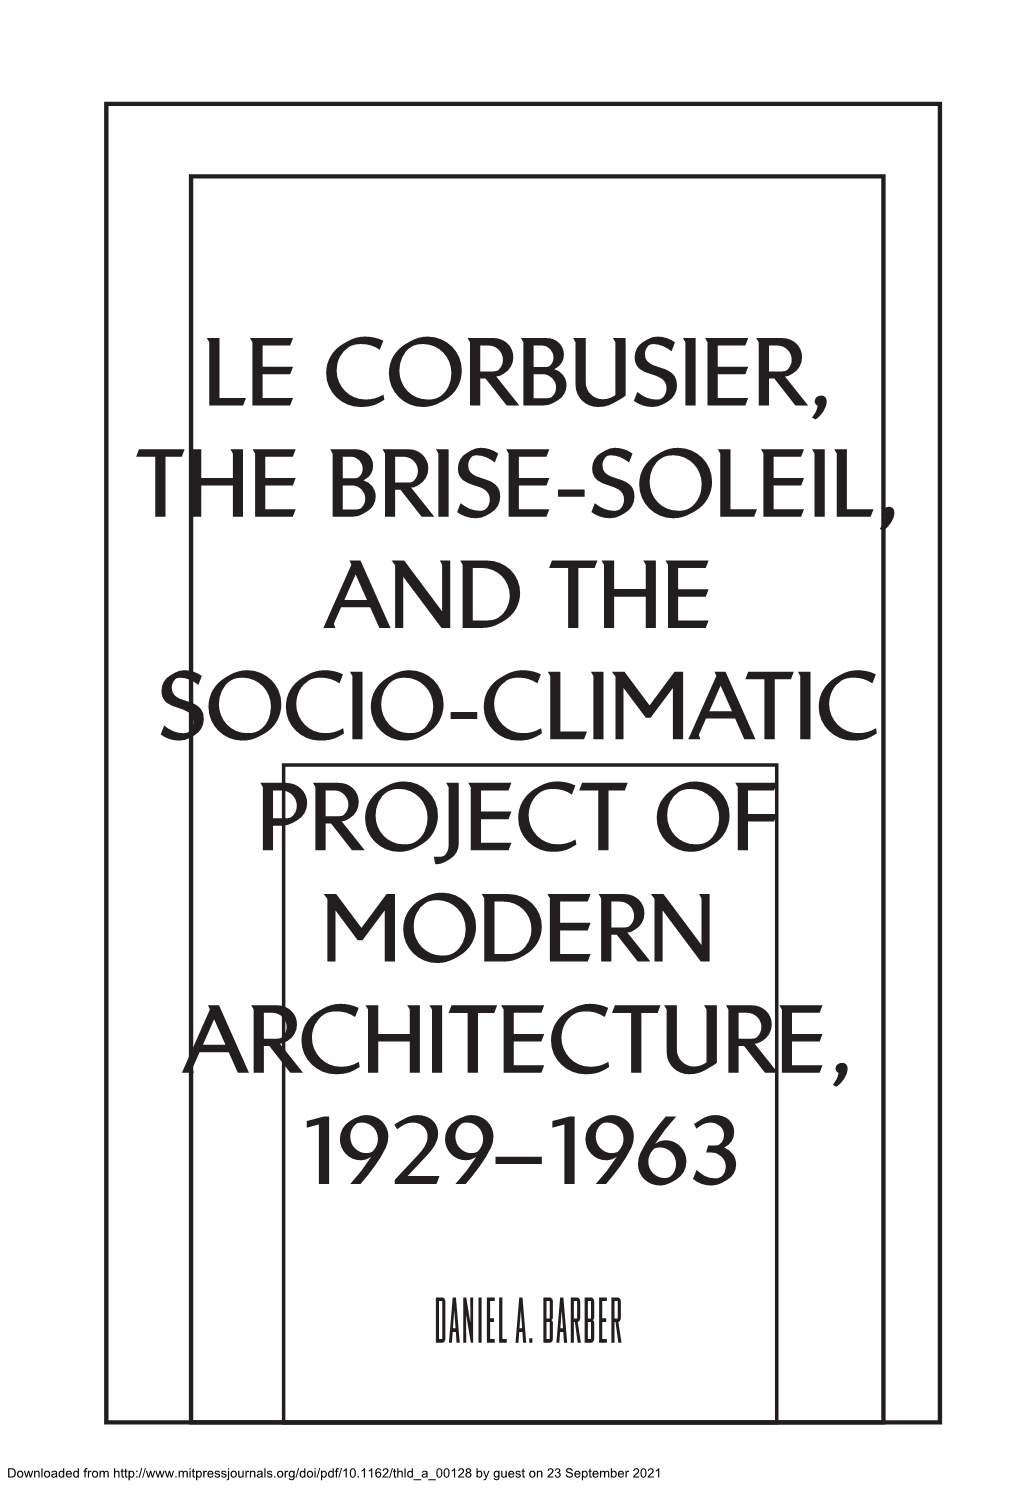 Le Corbusier, the Brise-Soleil, and the Socio-Climatic Project of Modern Architecture, 1929–1963